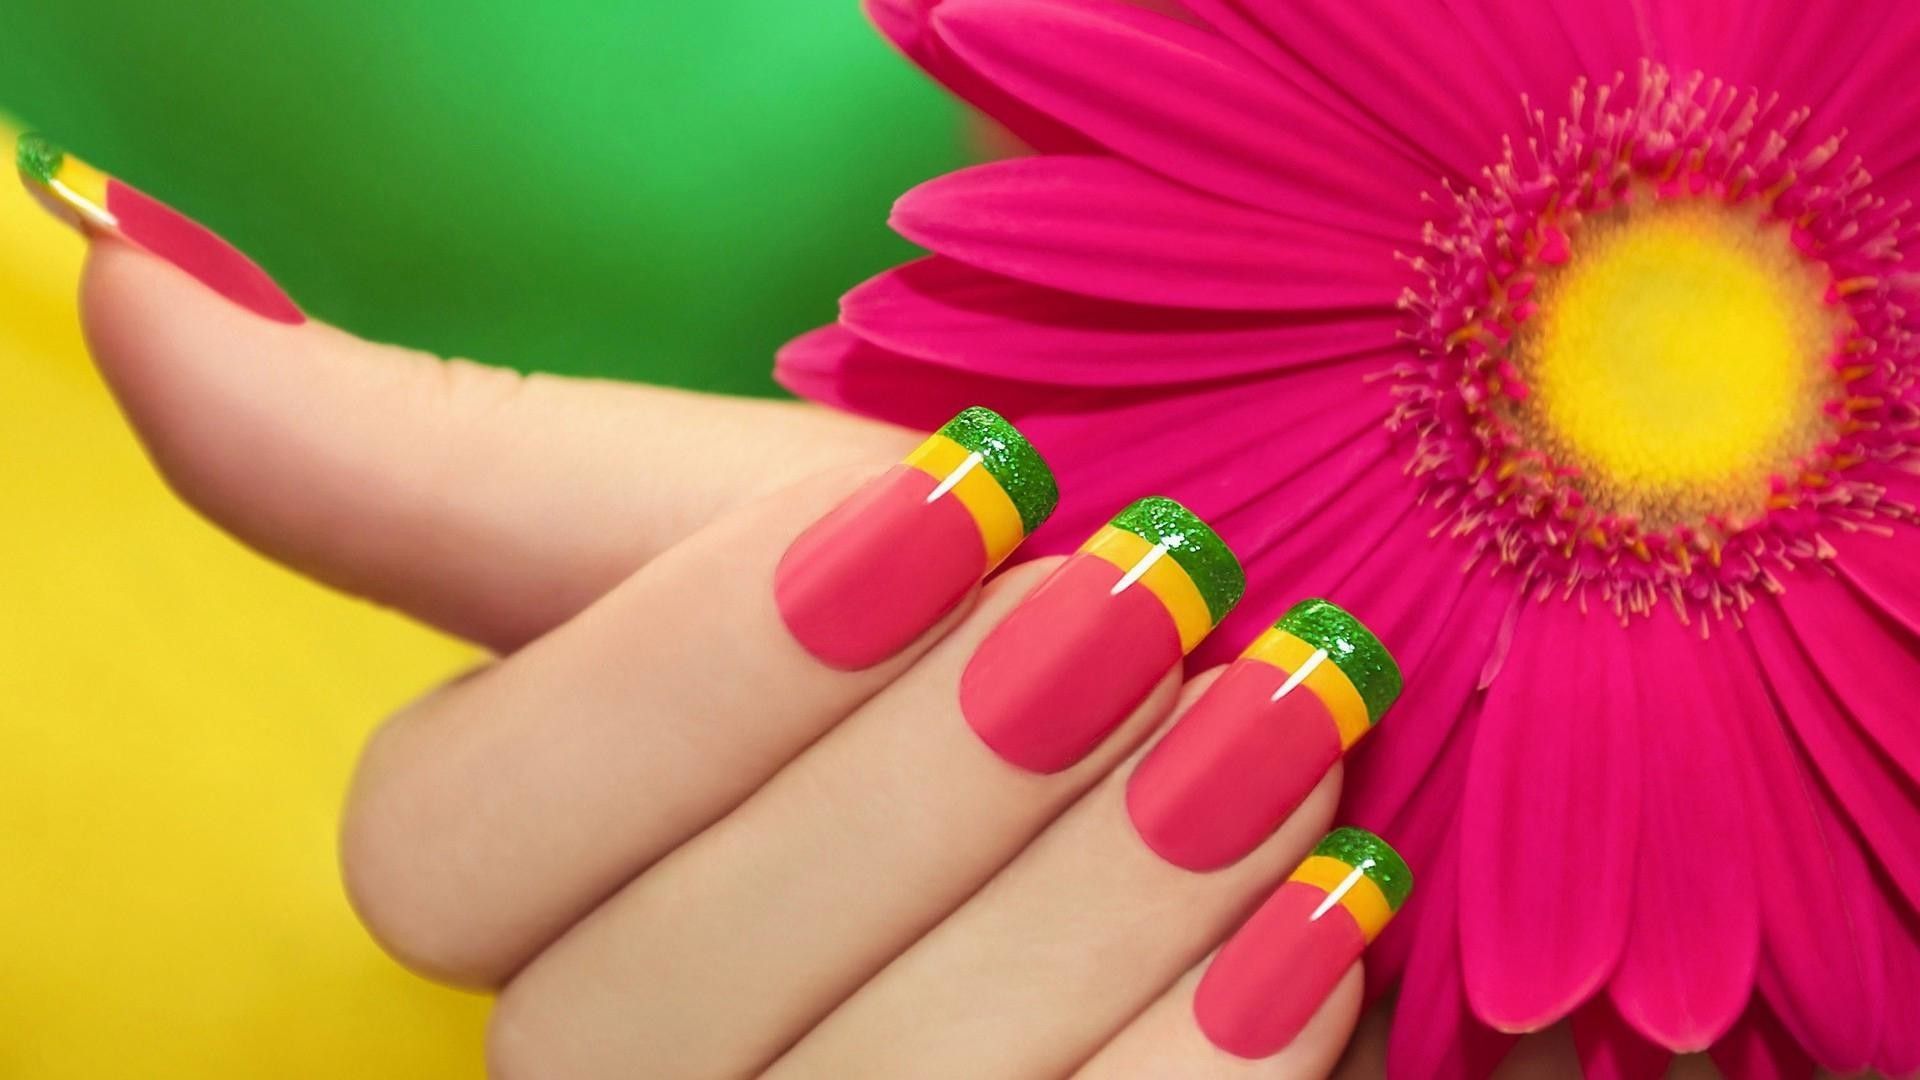 Colourful Nails Wallpaper Flowers And Nails Wallpaper Wallpaper & Background Download